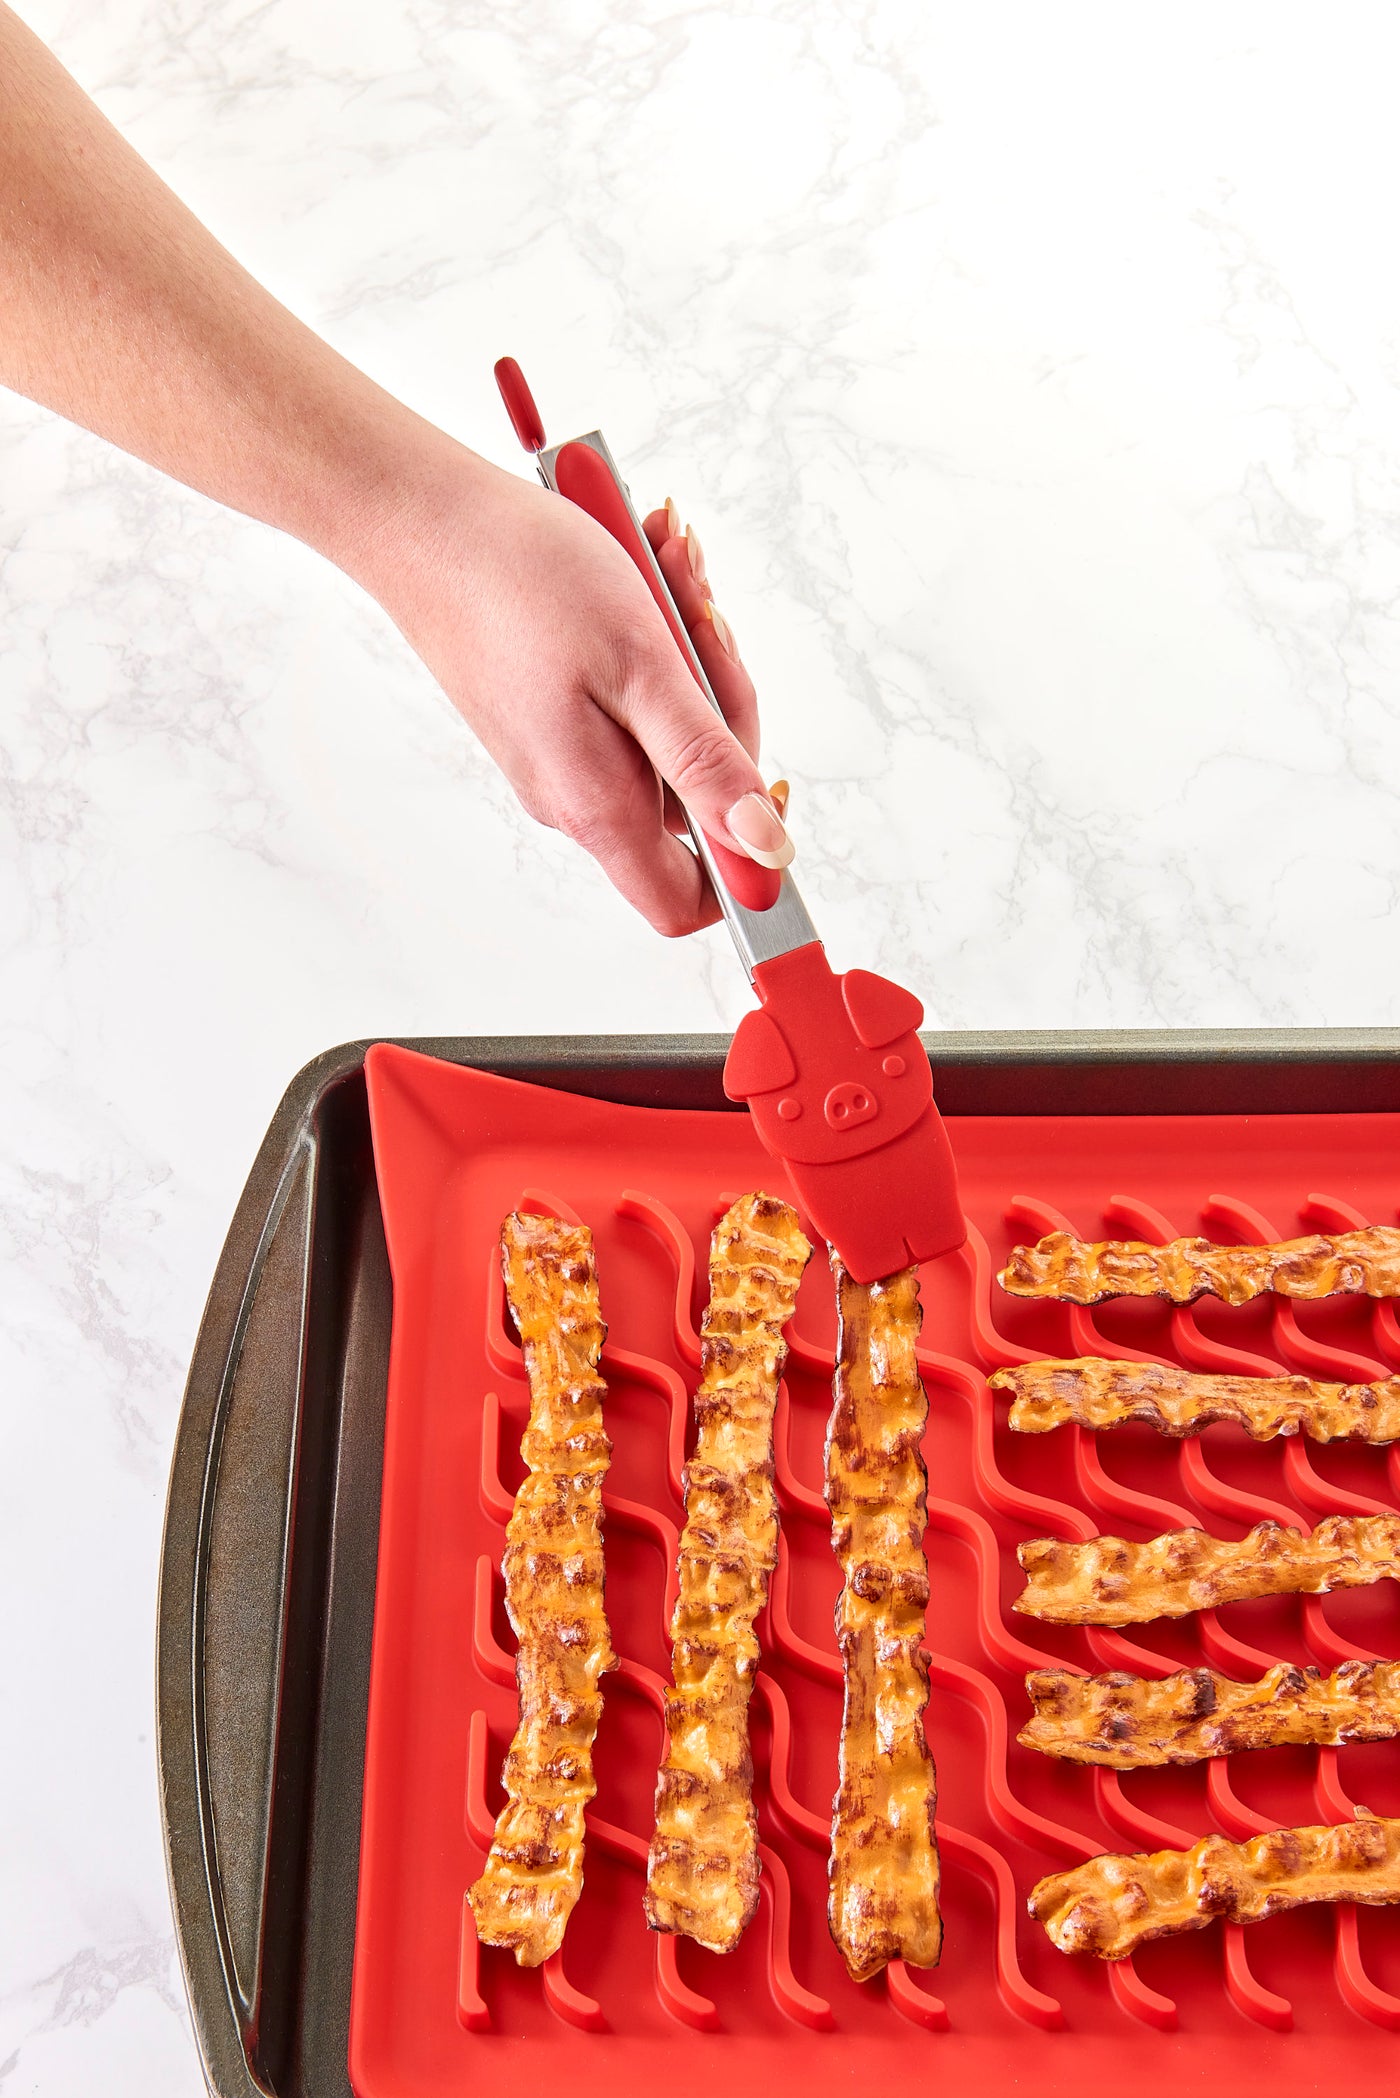 Talisman Designs Silicone Bacon Tongs | Heat Resistant up to 400-Degrees |  Turn & Serve Hot Bacon | Safe for Non-Stick Cookware, Meat, Vegetables 